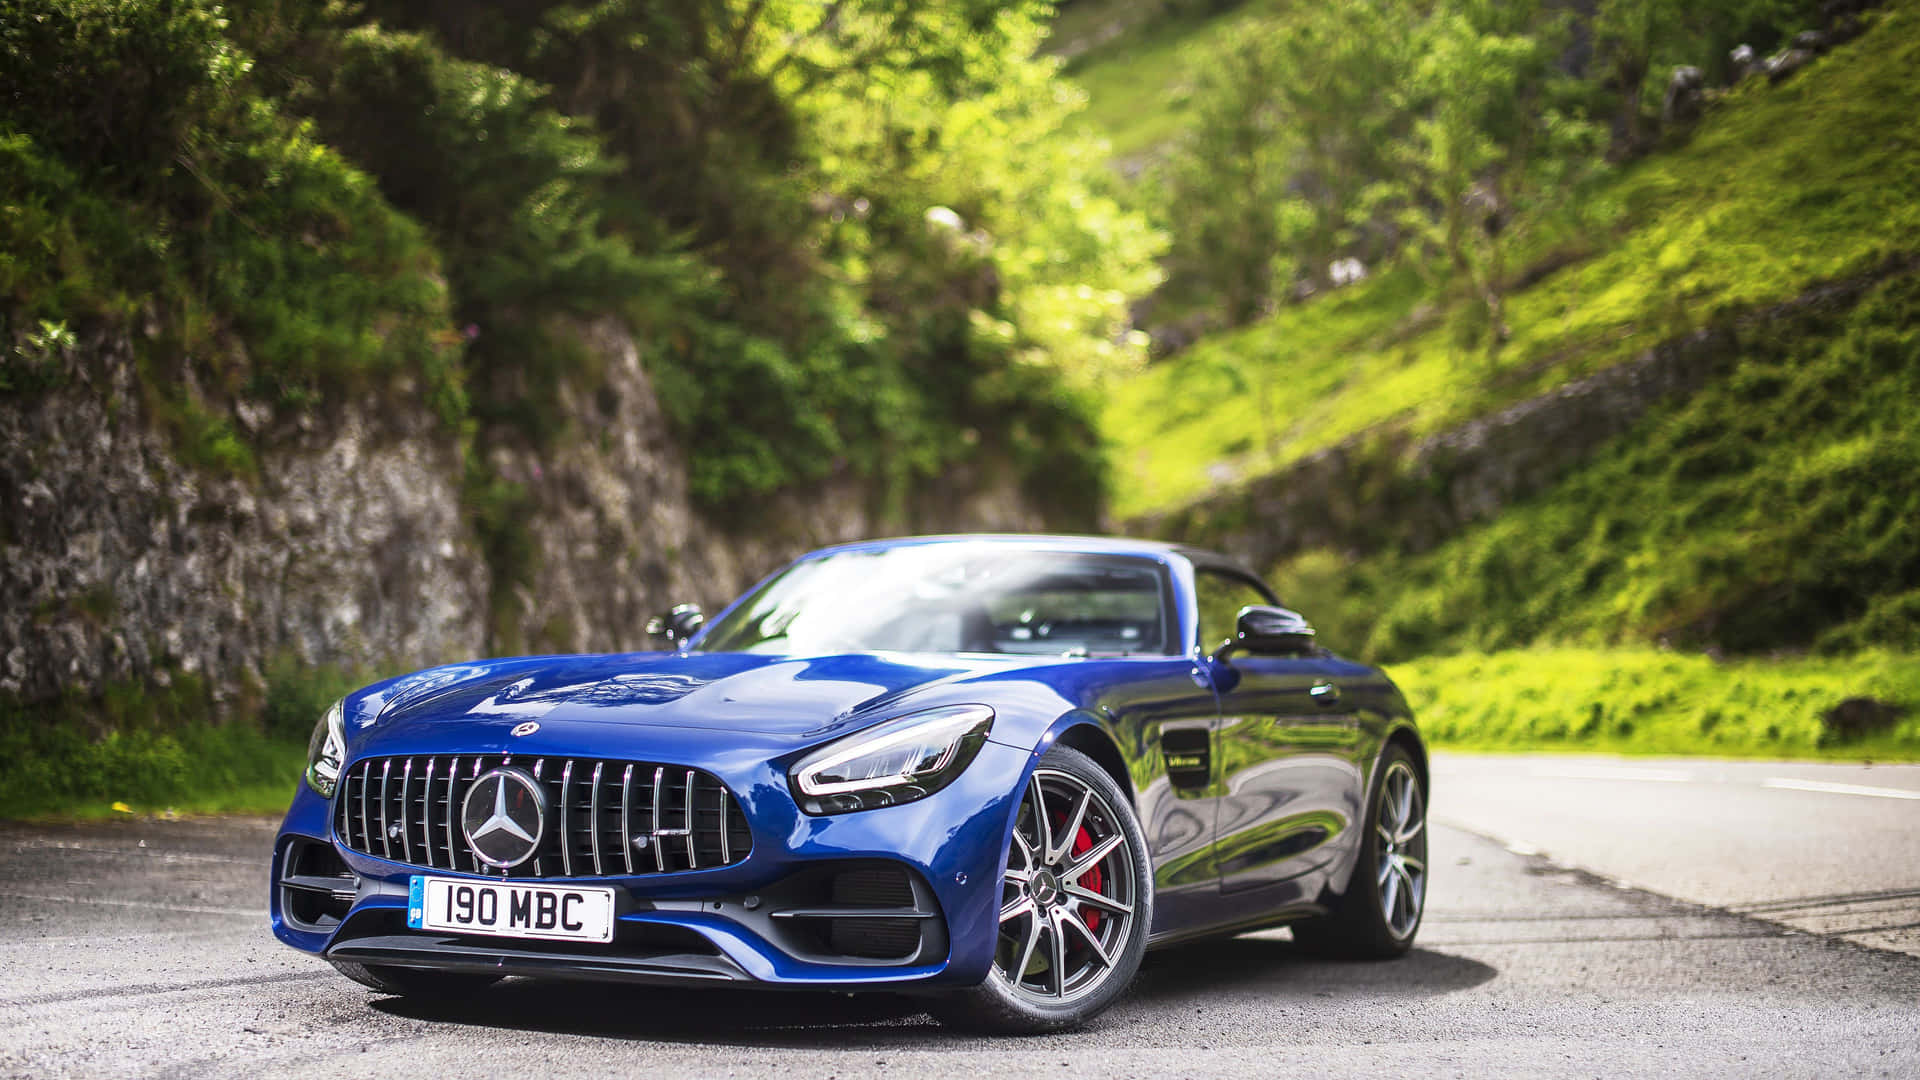 Experience Racing in the Mercedes AMG GT Wallpaper